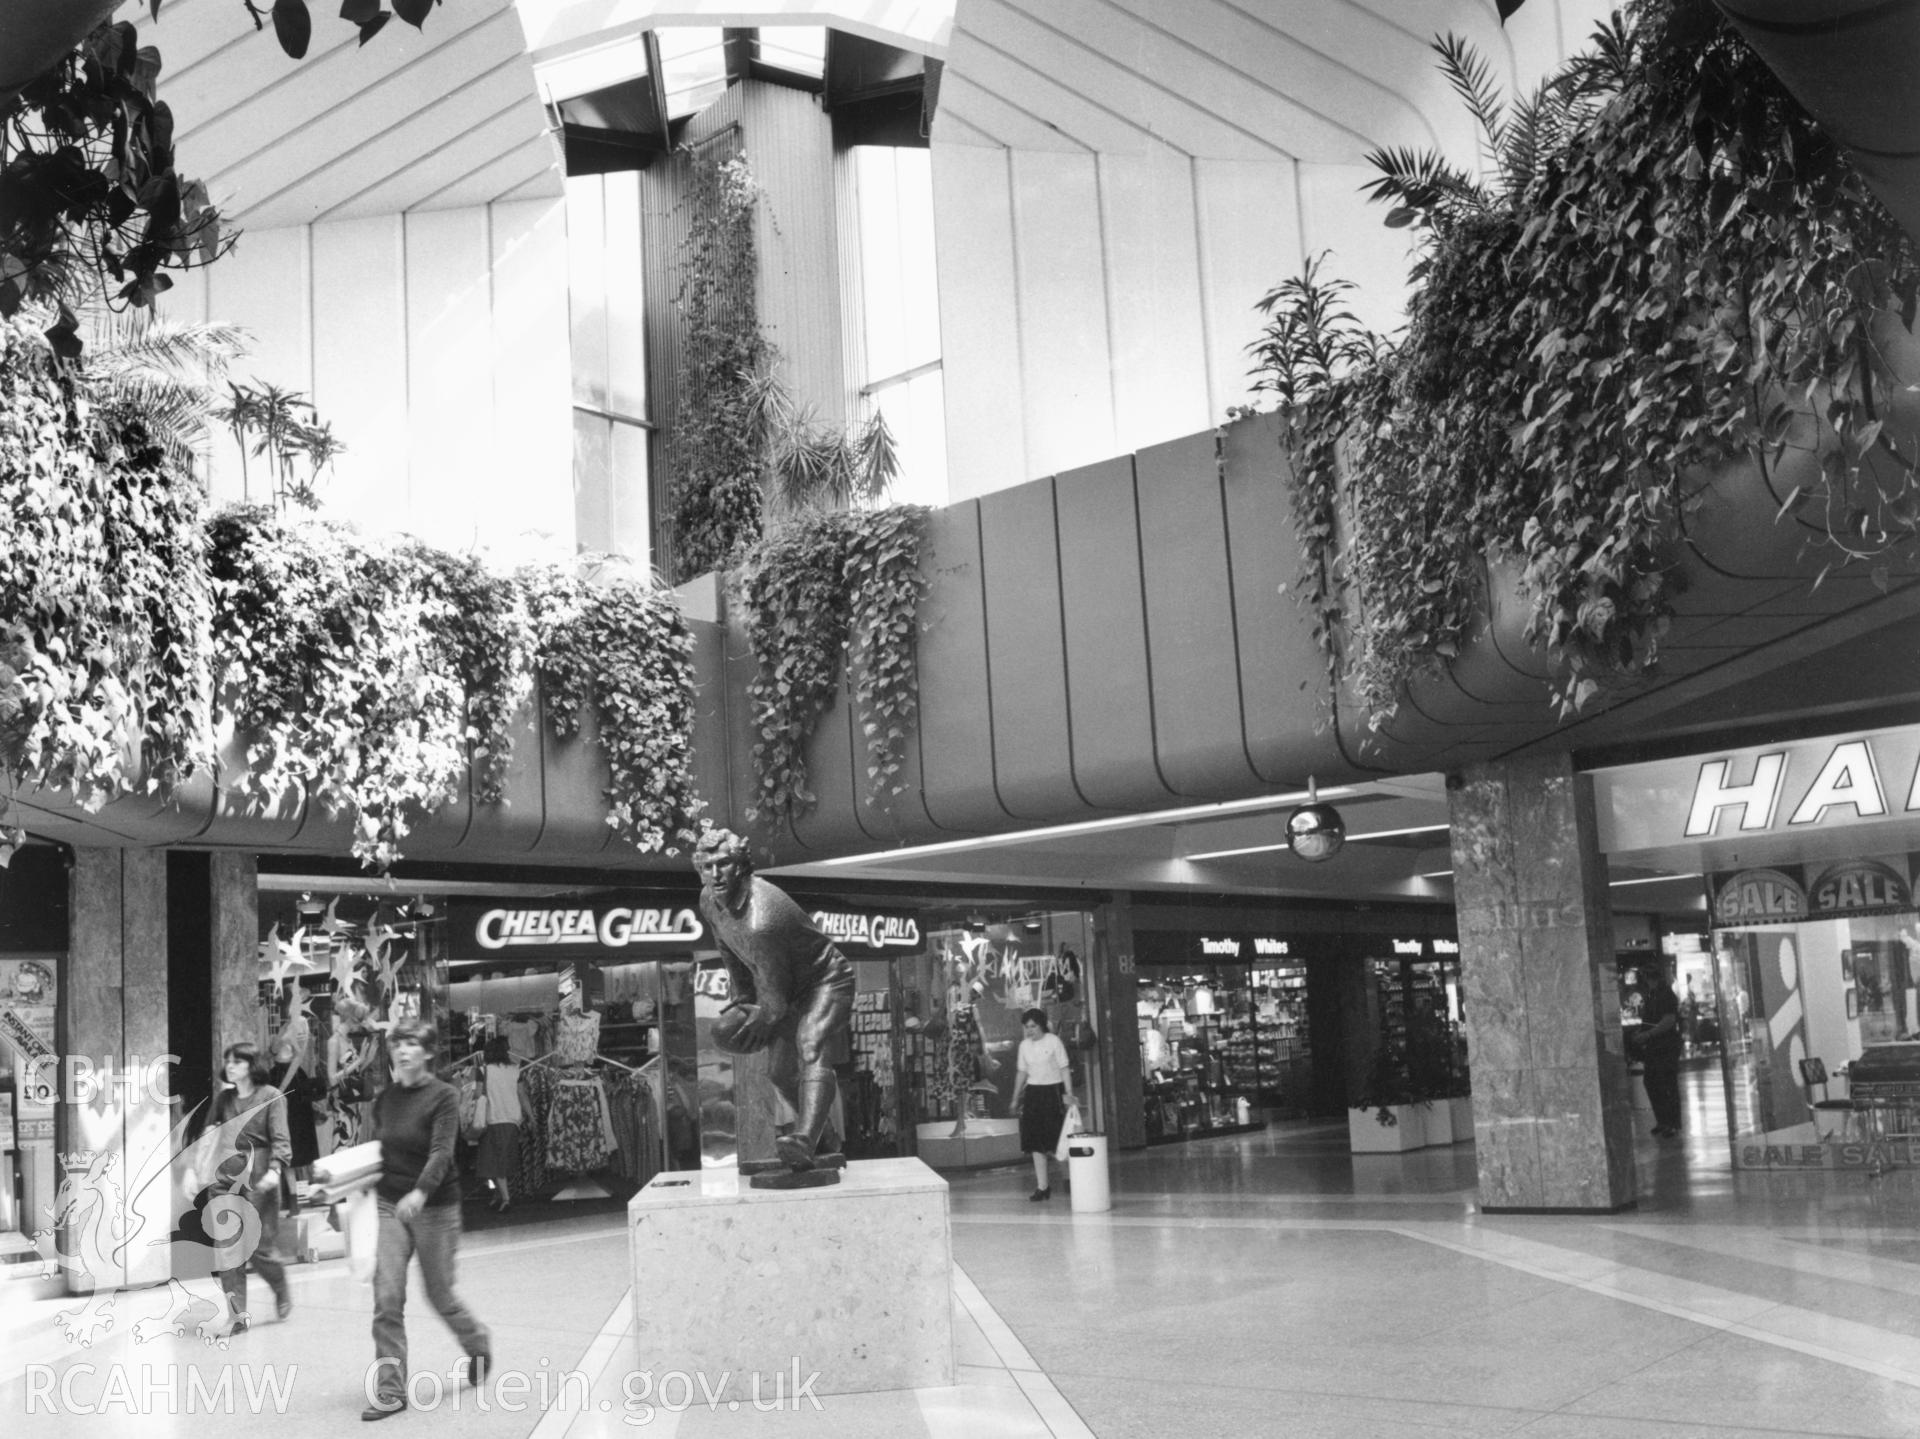 1 b/w print showing the bronze statue of Gareth Edwards in St Davids Shopping Centre, Cardiff, collated by the former Central Office of Information.